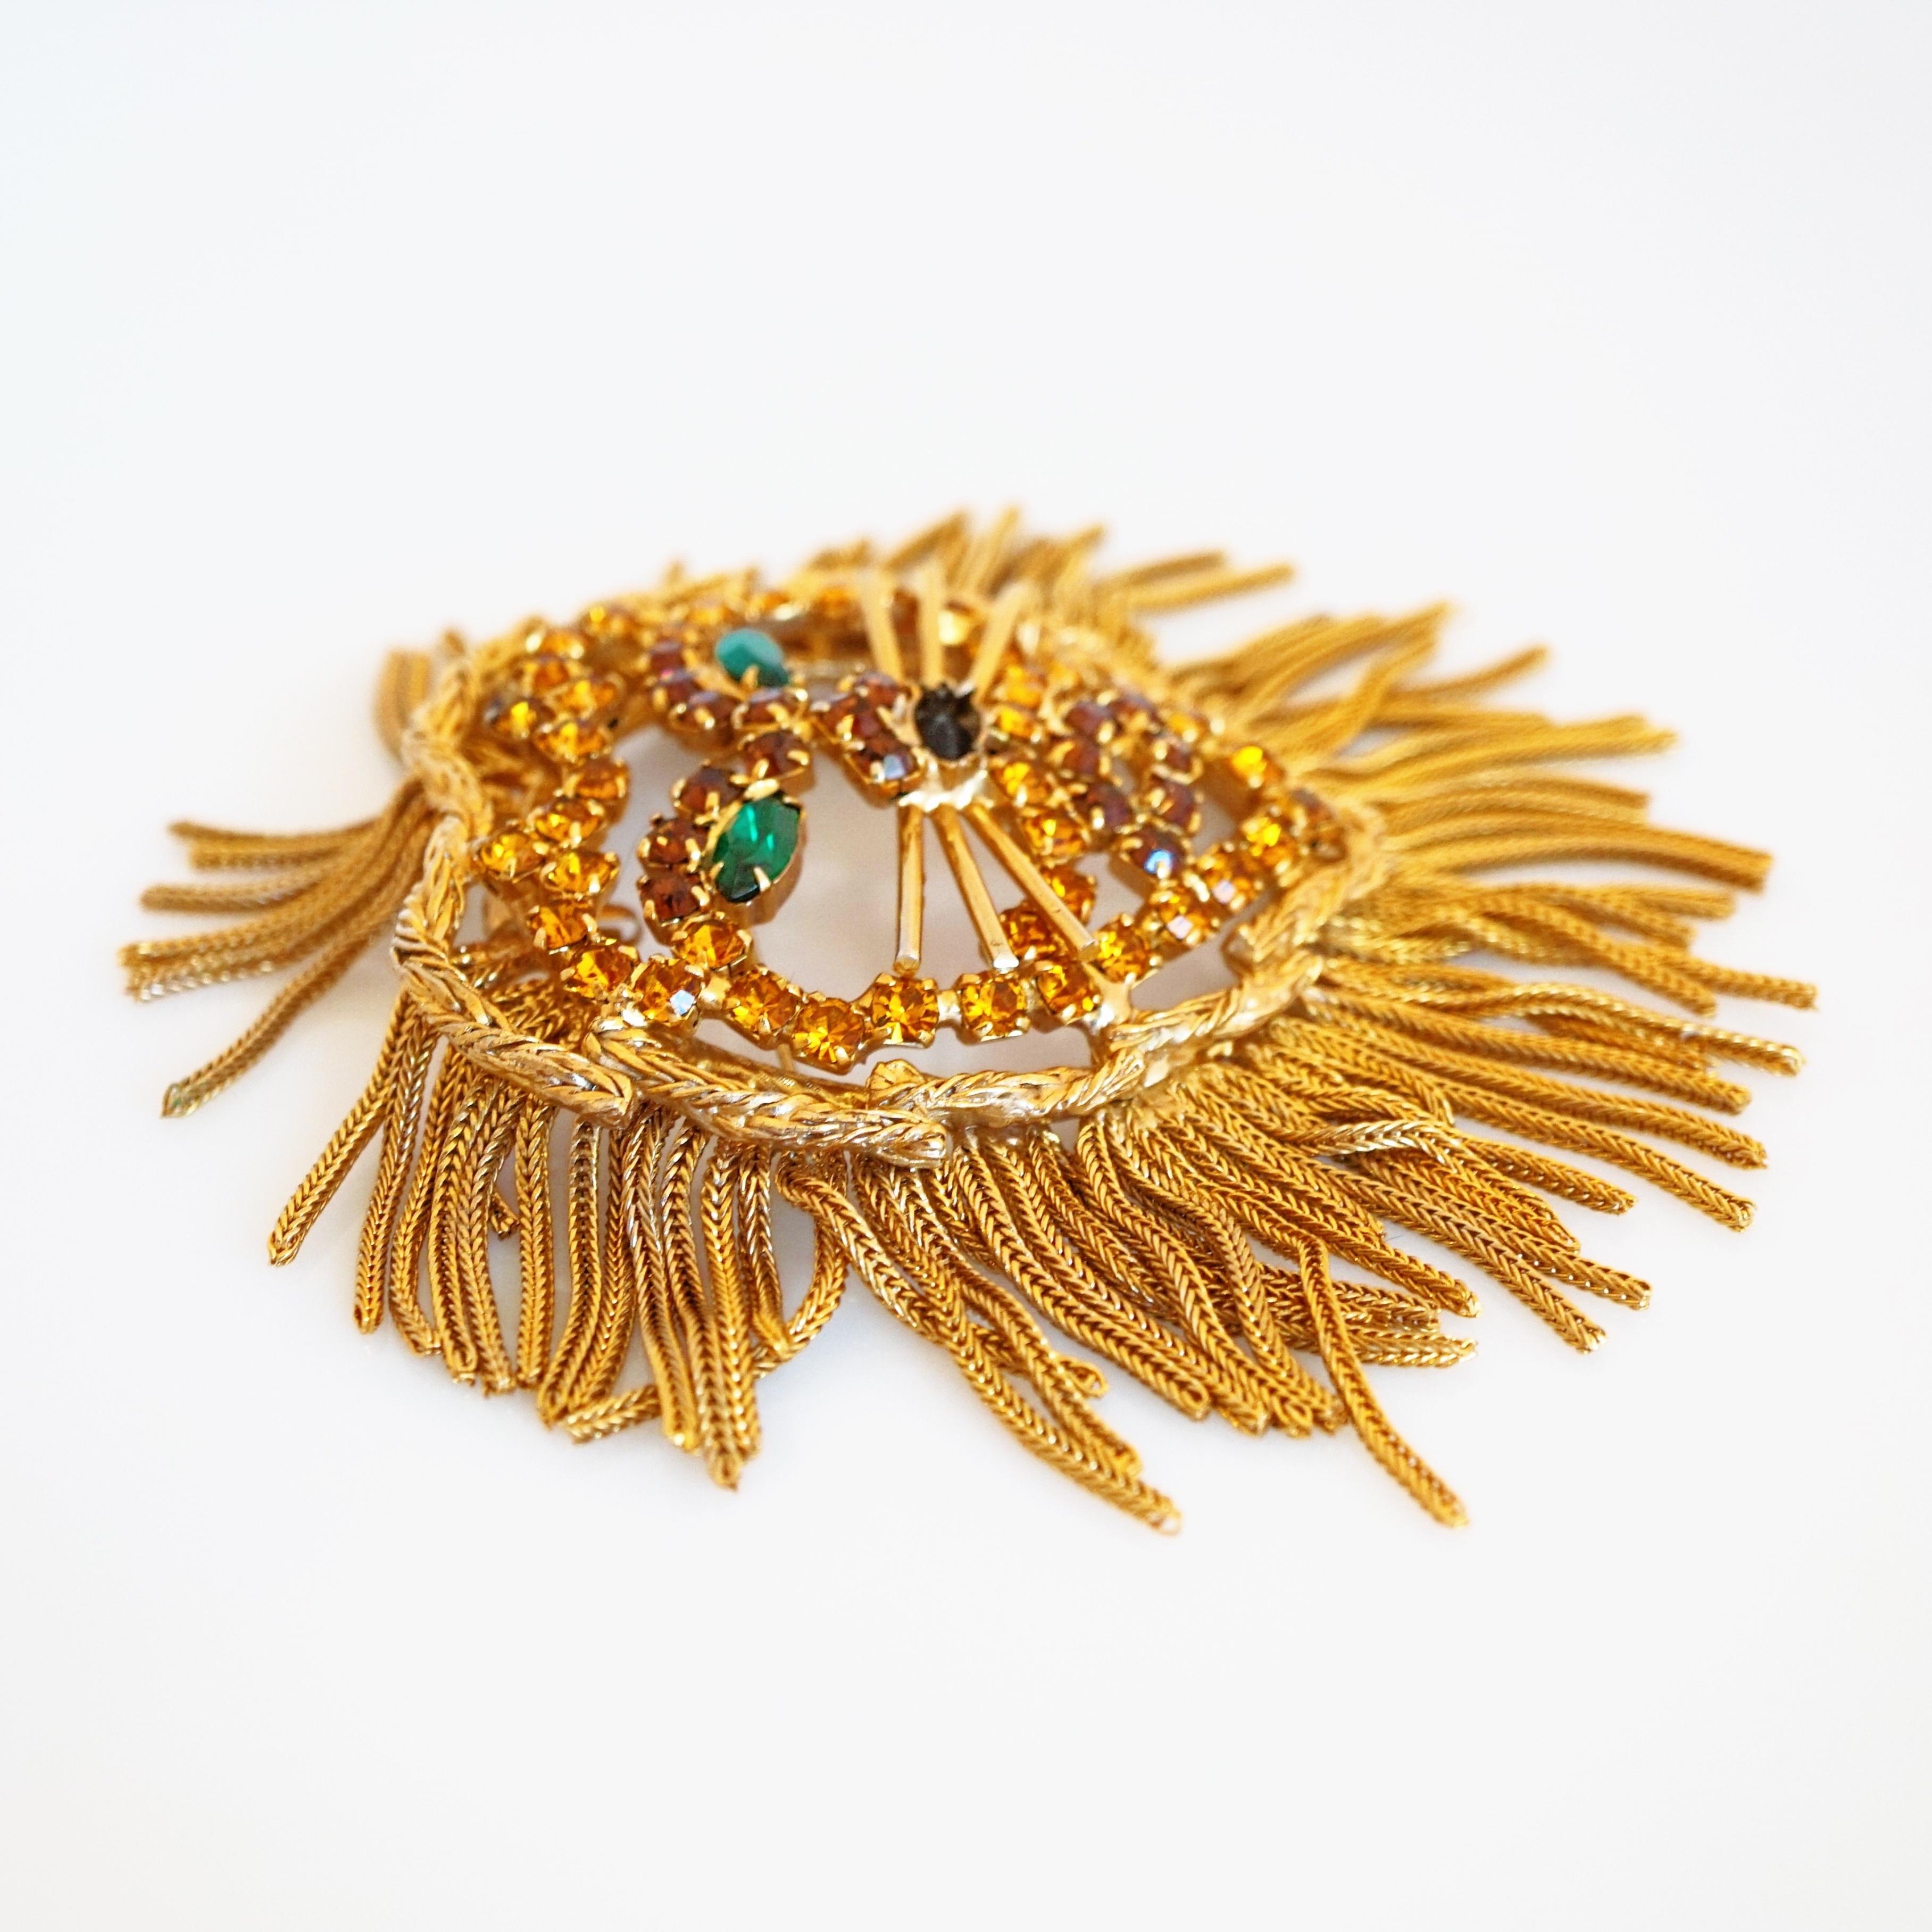 Modern Lion Brooch With Rhinestones and Gold Chain Fringe By Dominique, 1960s For Sale